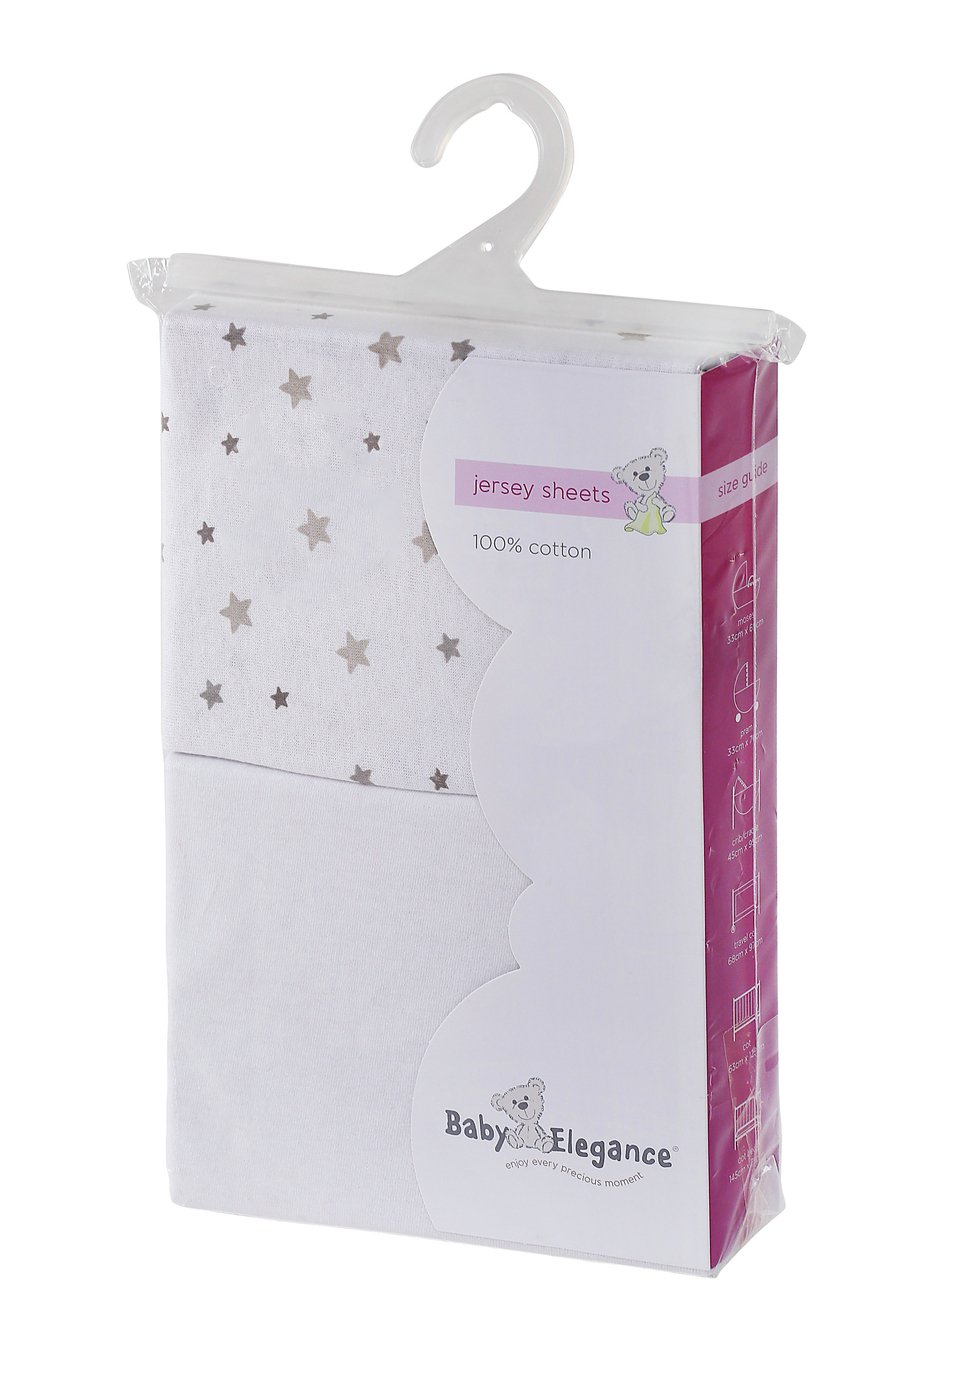 Baby Elegance Cot Size 2 Pack Jersey Sheets Review